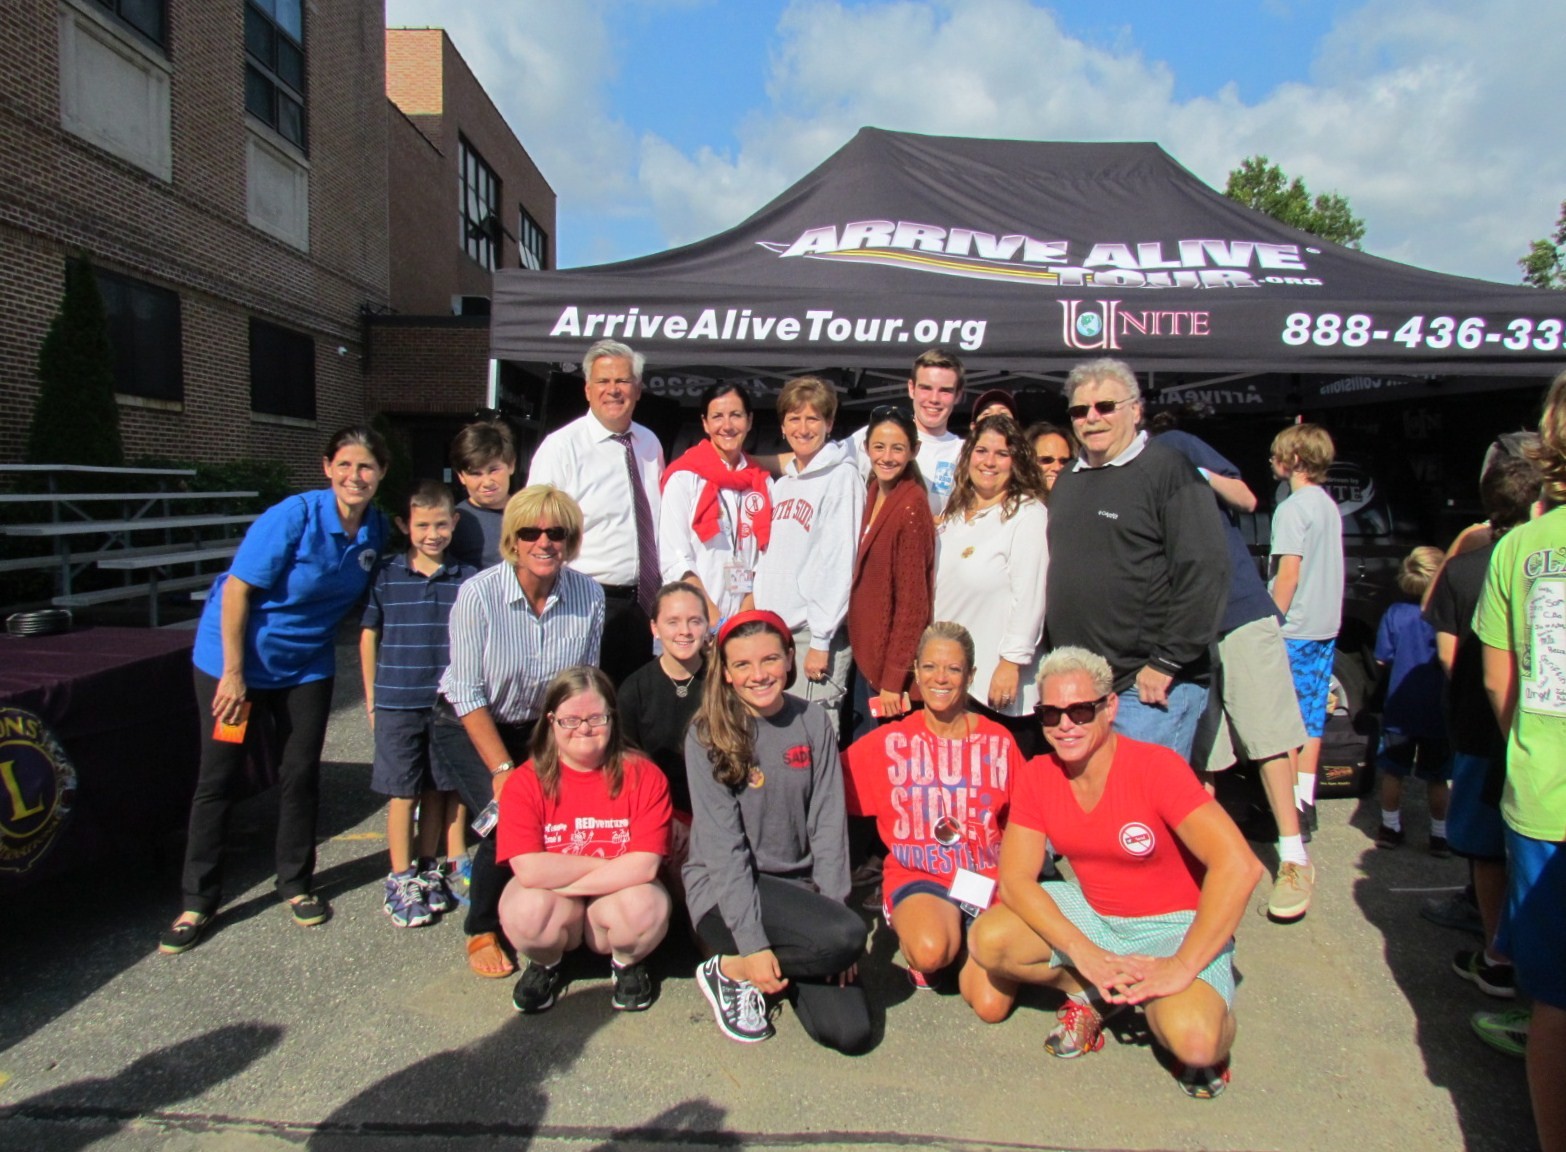 School officials and Youth Council members with Senator Dean Skelos outside the Arrive Alive tent, which teaches the consequences of drinking and driving.